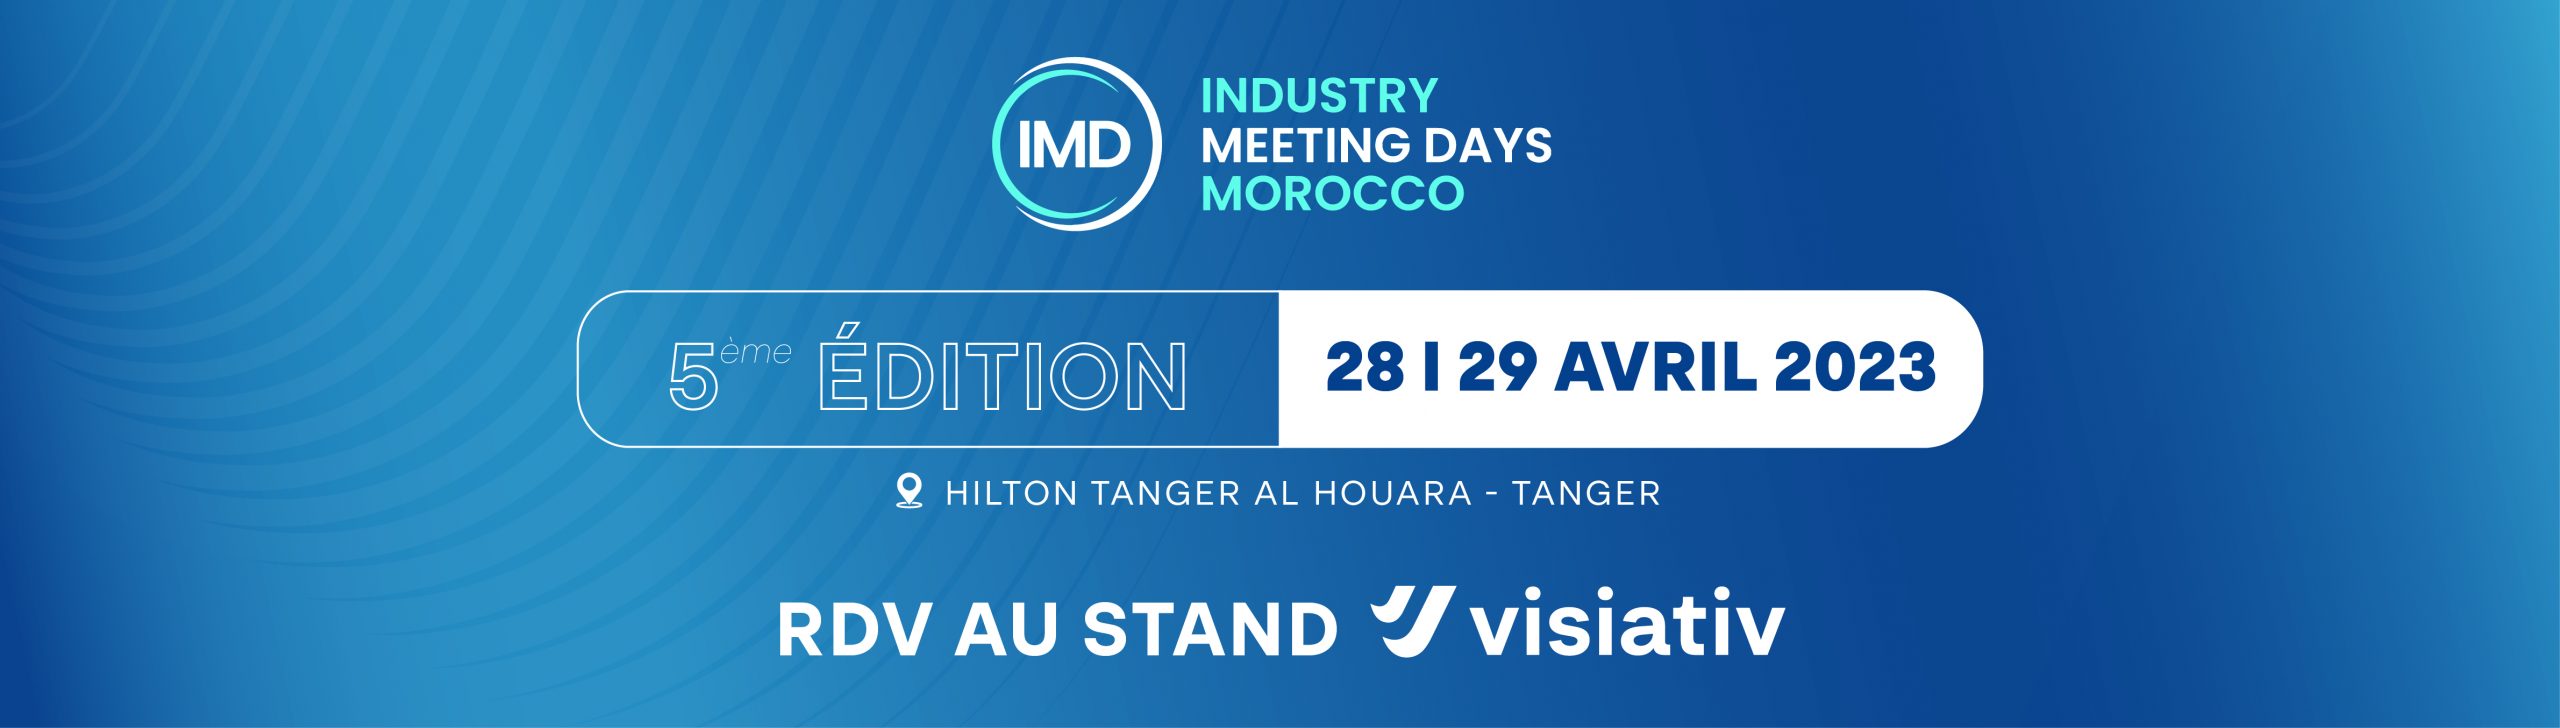 INDUSTRY MEETING DAY, 5ème Edition